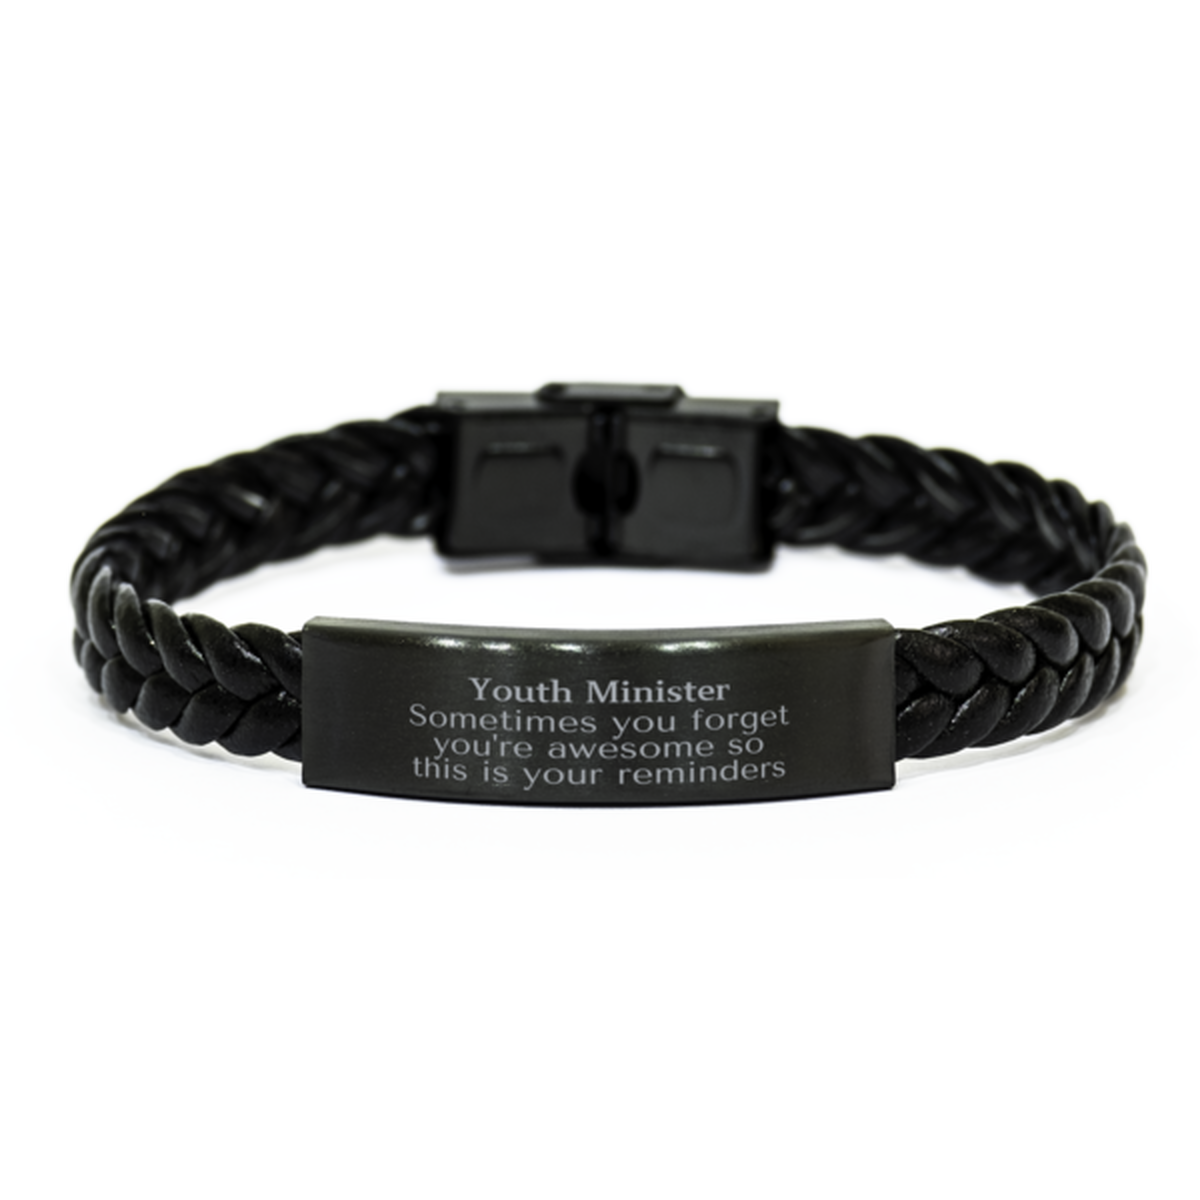 Sentimental Youth Minister Braided Leather Bracelet, Youth Minister Sometimes you forget you're awesome so this is your reminders, Graduation Christmas Birthday Gifts for Youth Minister, Men, Women, Coworkers